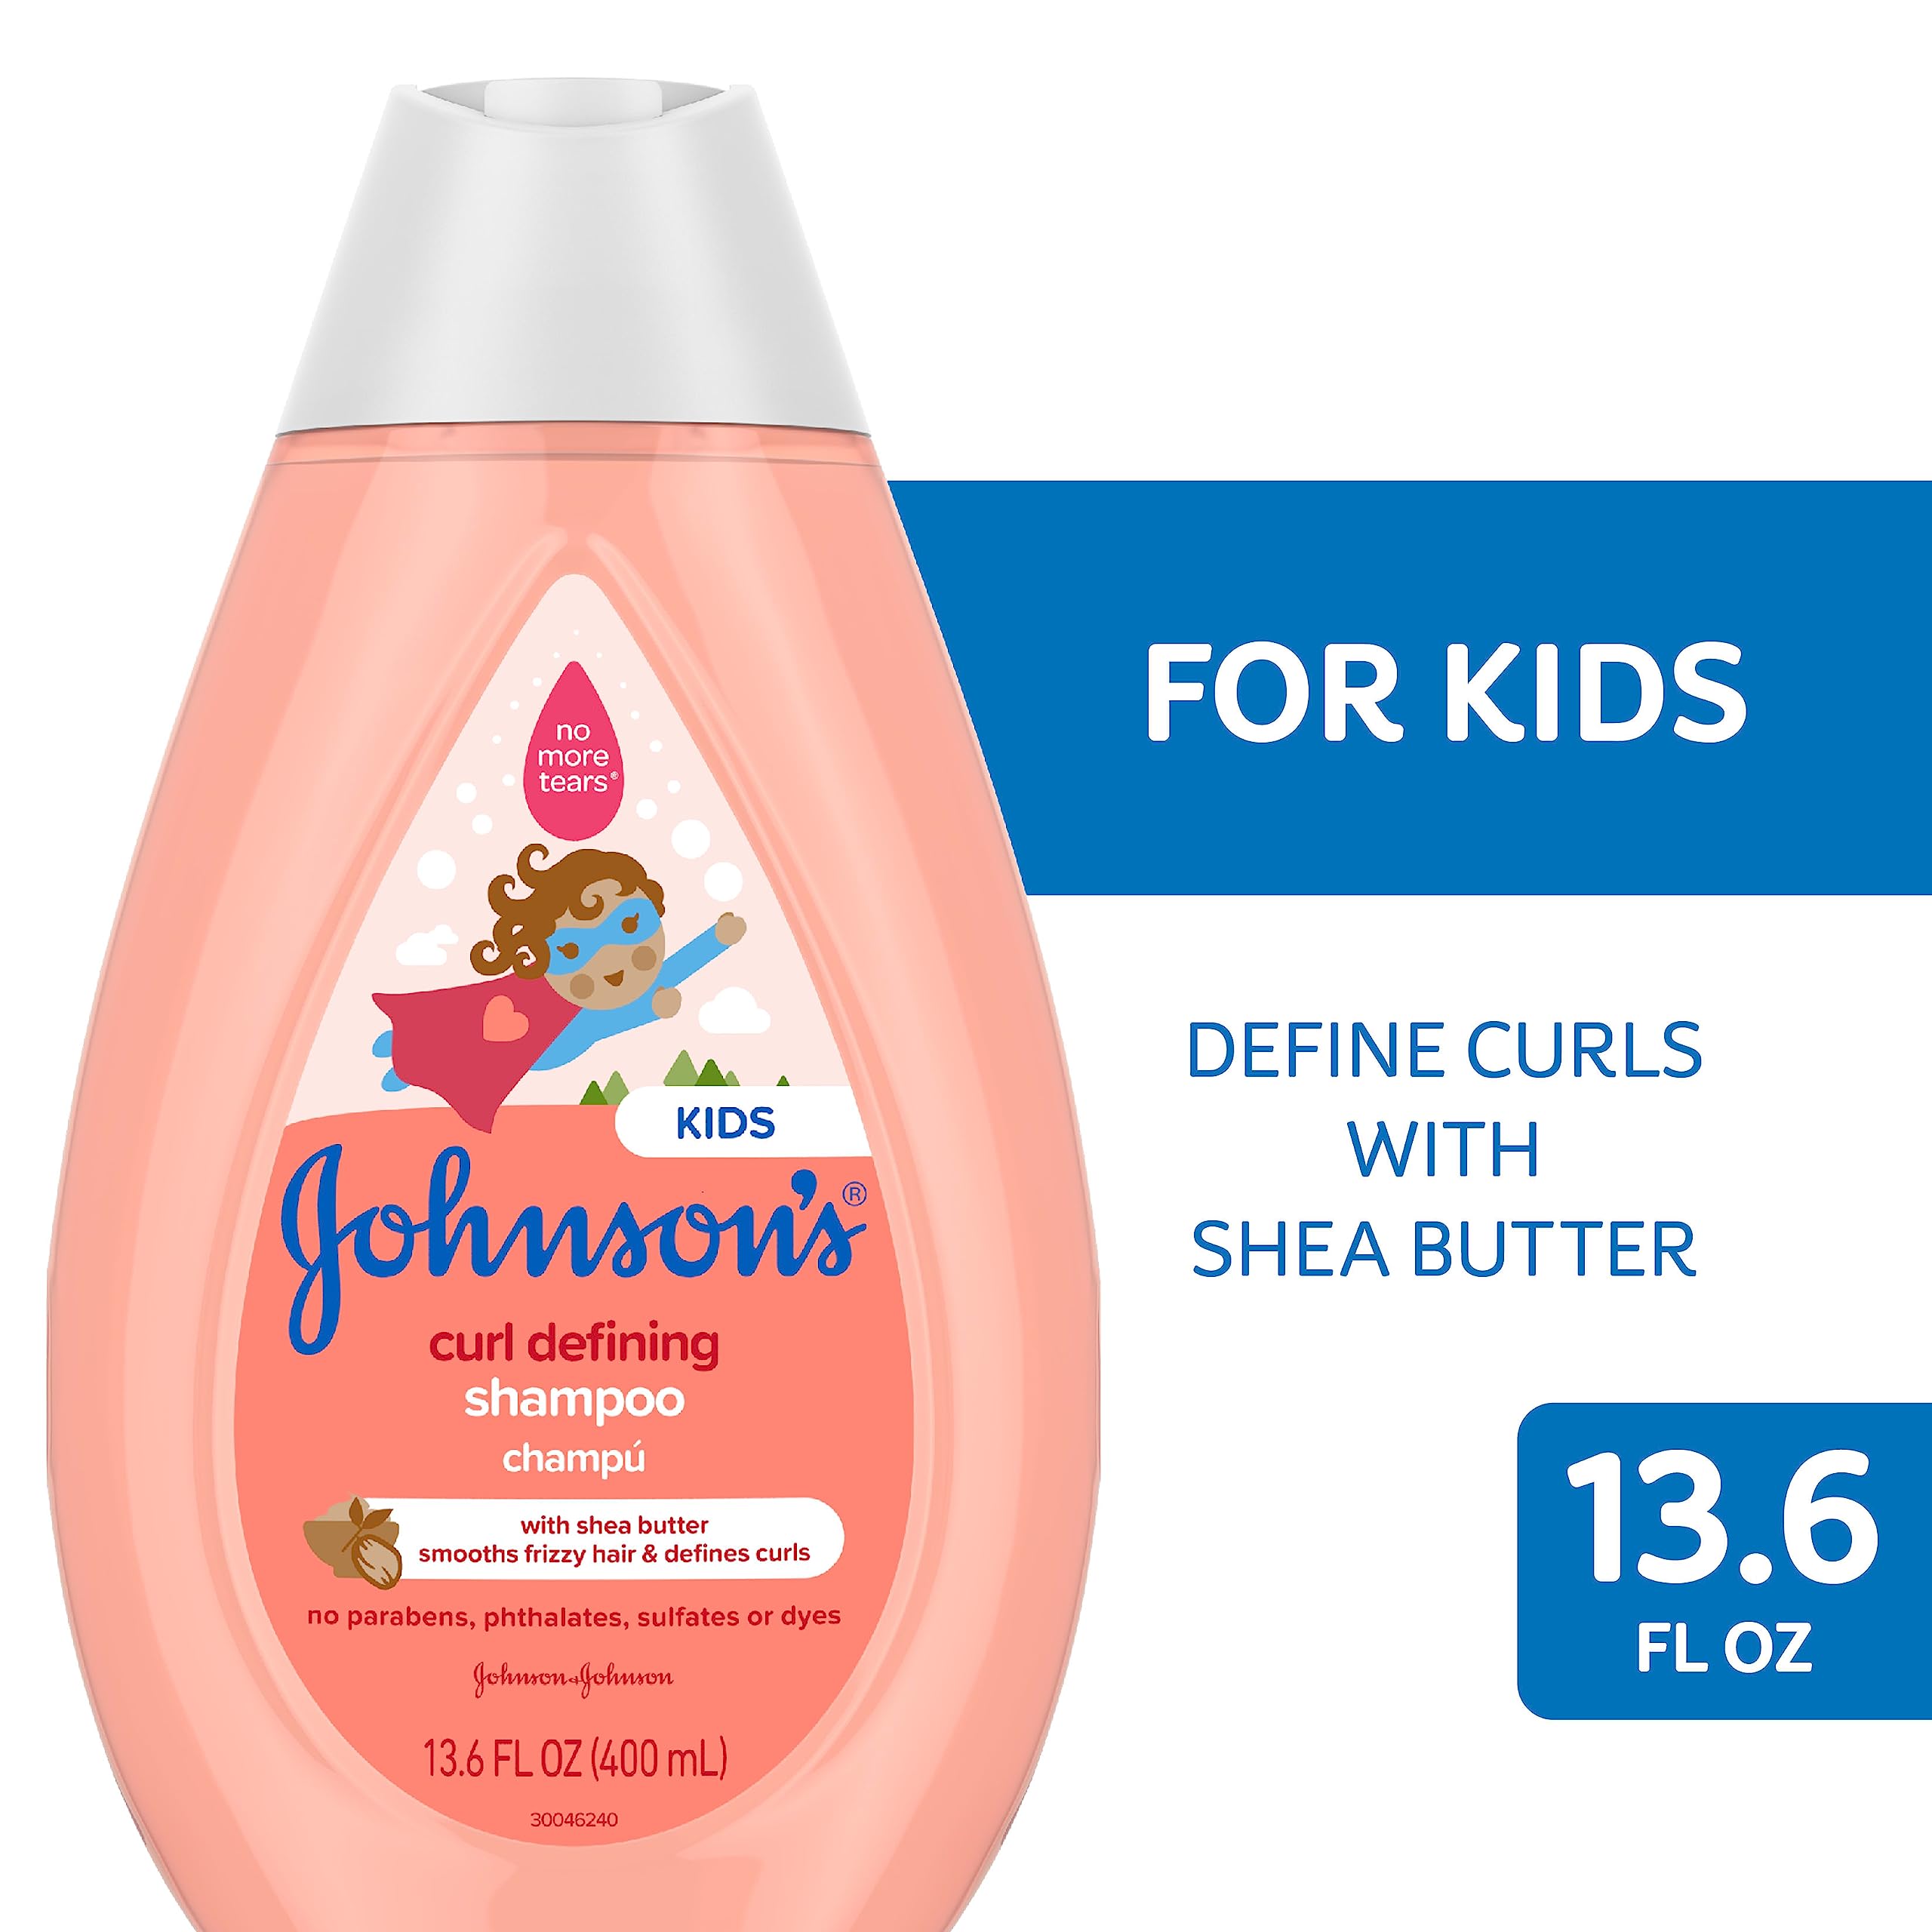 Johnson's Curl-Defining, Frizz Control, Tear-Free Kids' Shampoo with Shea Butter, Paraben-, Sulfate- & Dye-Free Formula, Hypoallergenic & Gentle for Toddler's Hair, 13.6 fl. oz